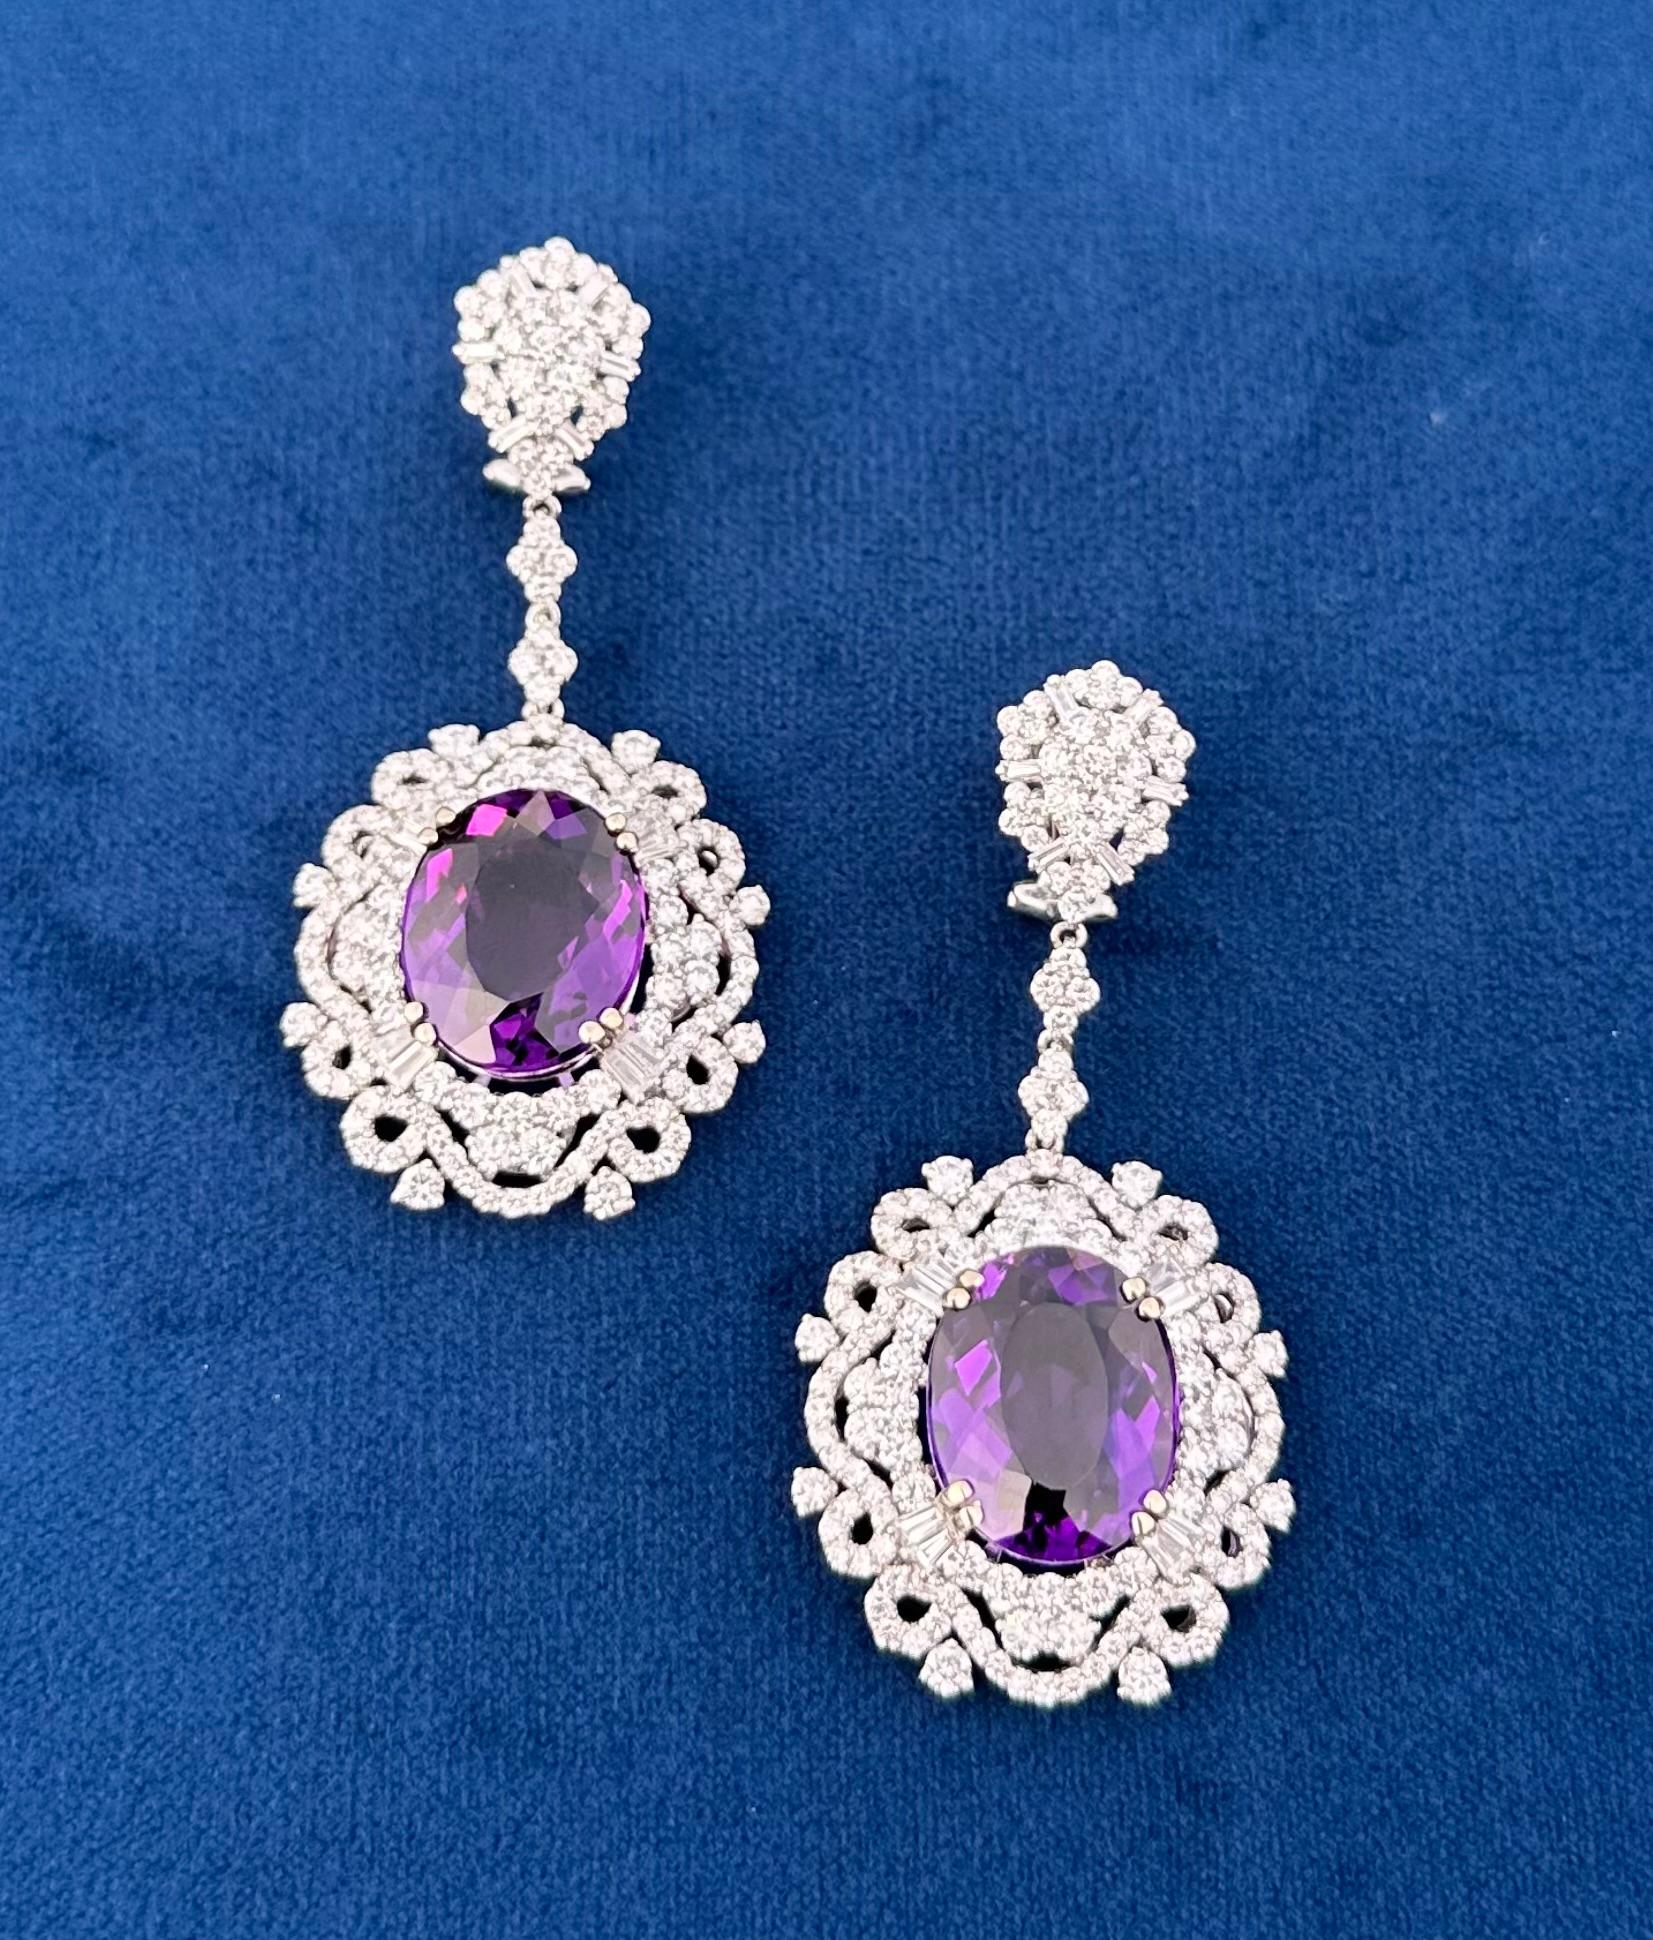 Artisan Exquisite Pair of 42.49 Carat Amethyst and Diamond 18K White Gold Earrings For Sale